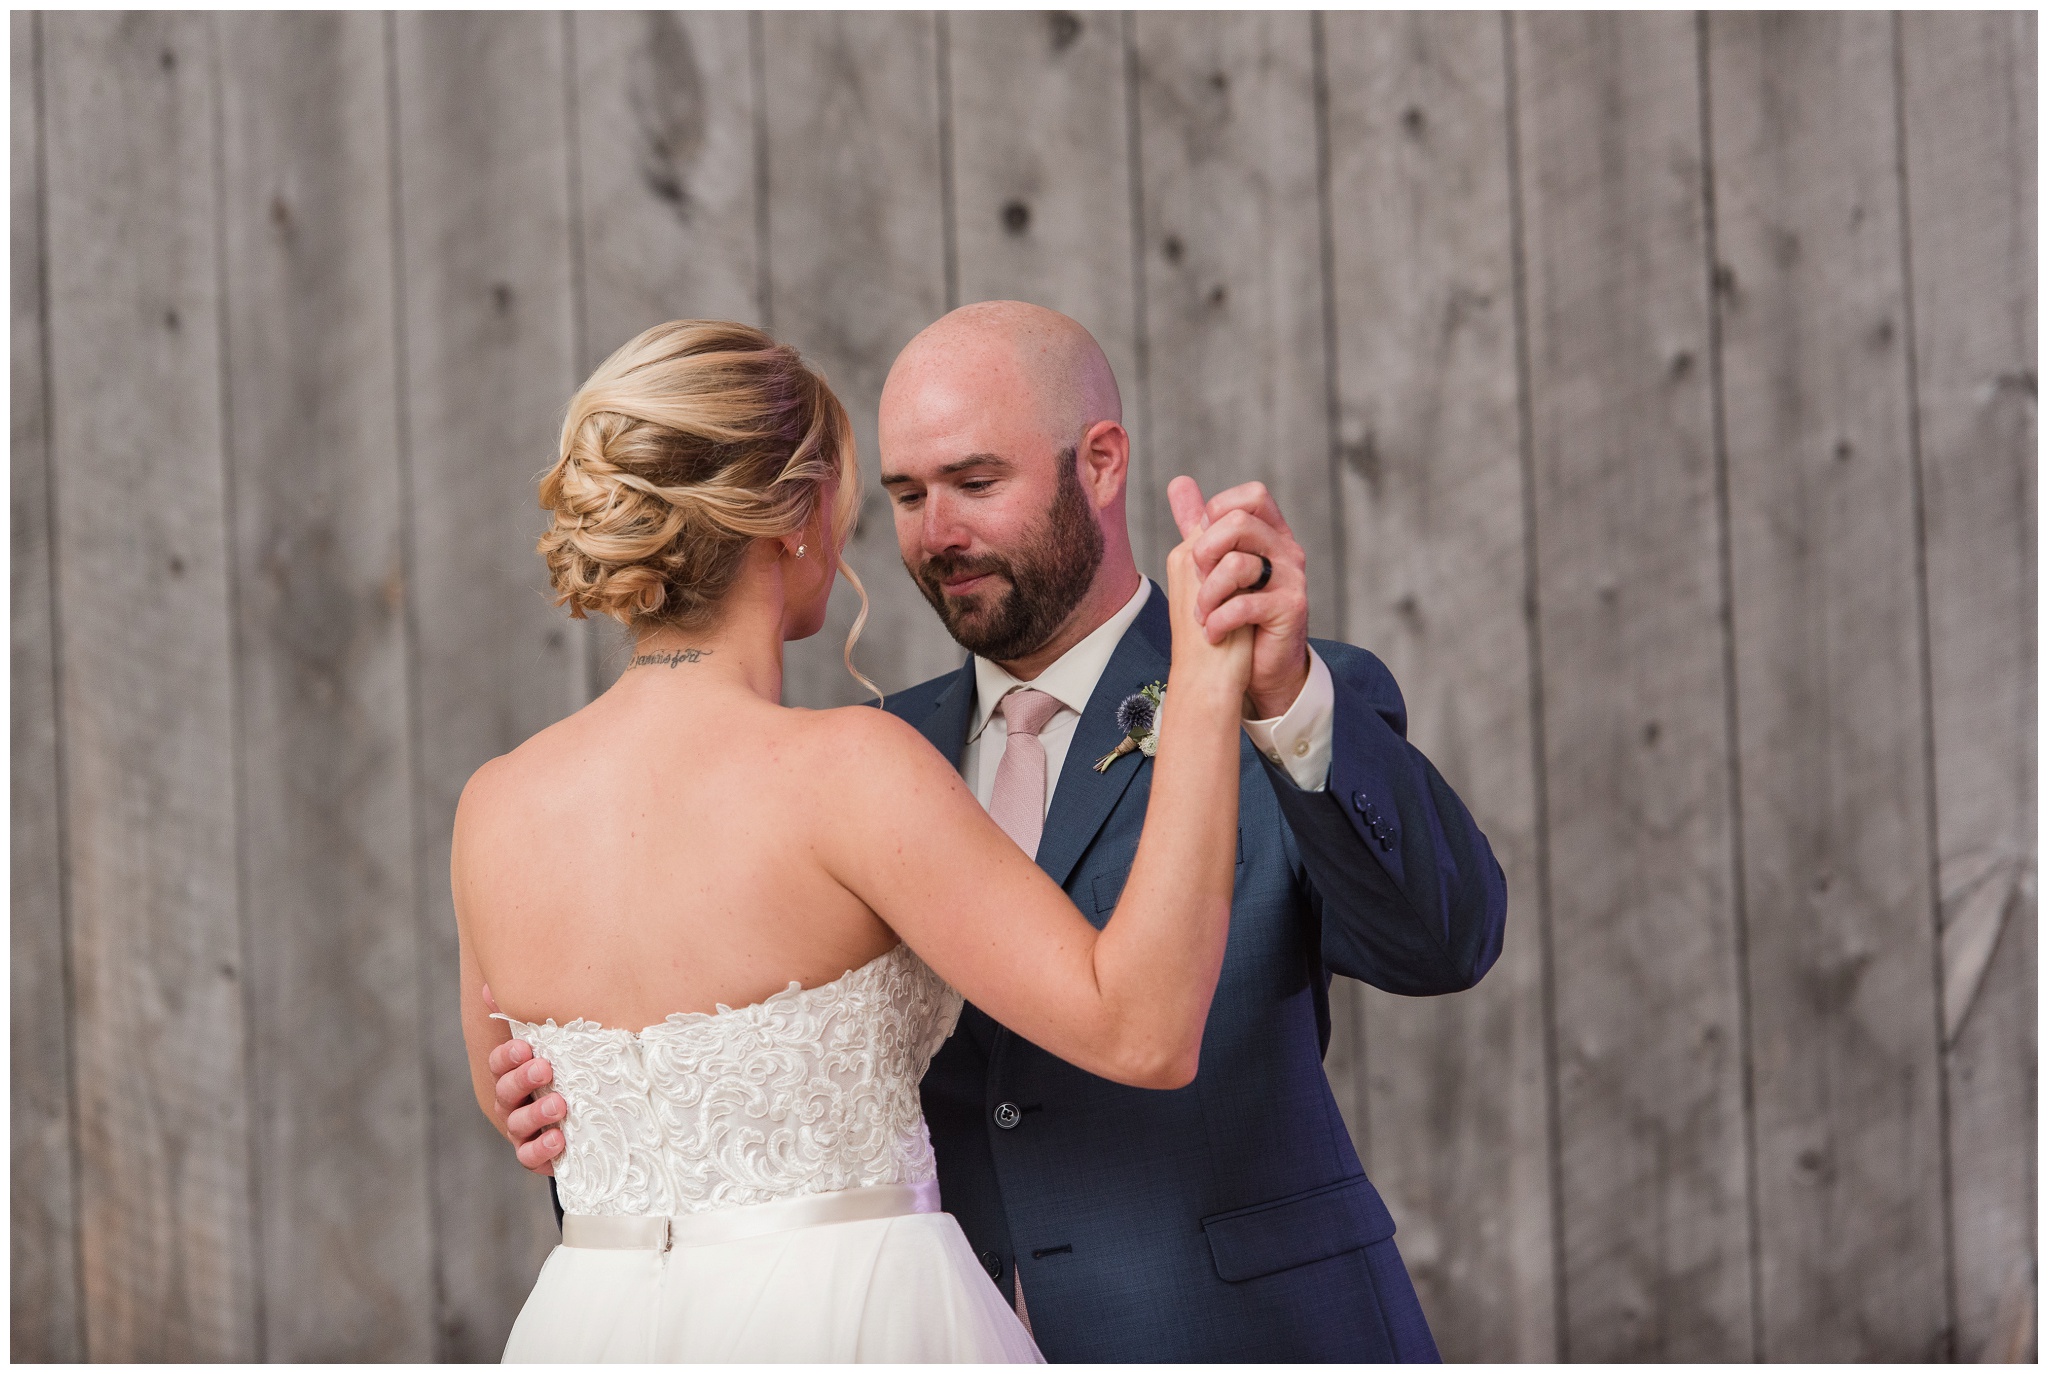 Seacoast New Hampshire Wedding Photographer | Amy Brown Photography | Flag Hill Winery